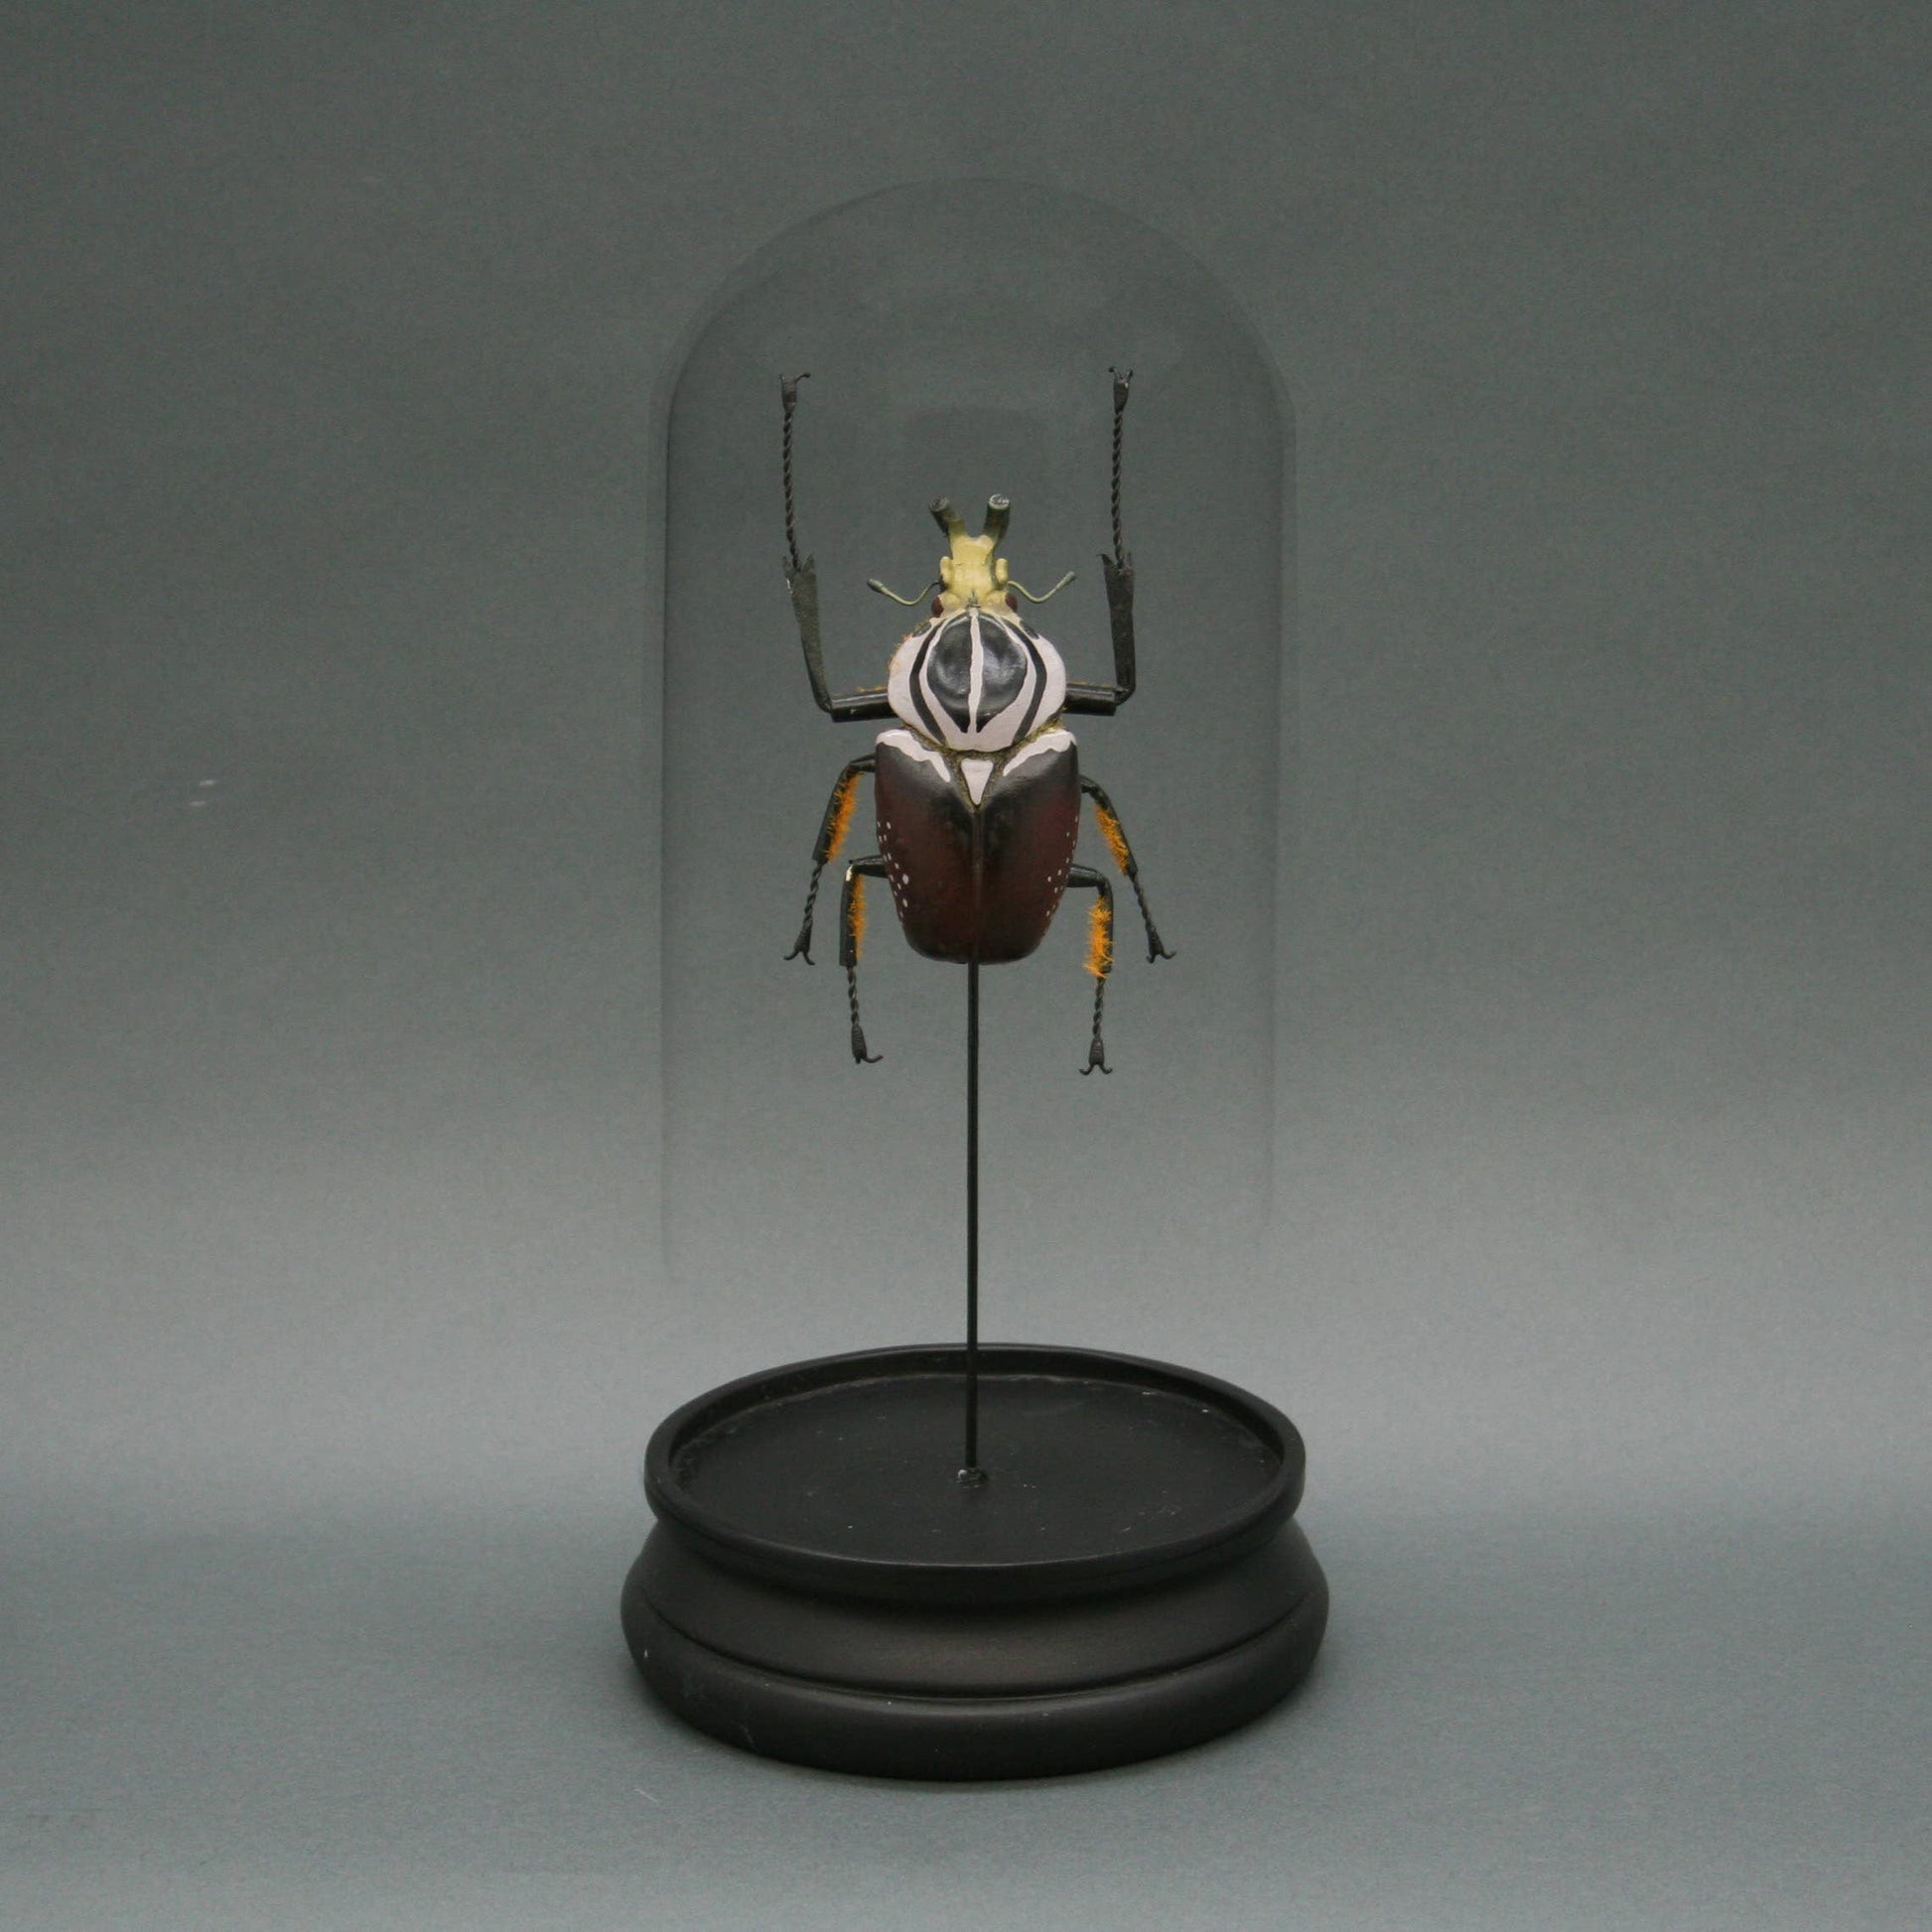 Goliath Beetle Glass Cloche - Stemcell Science Shop